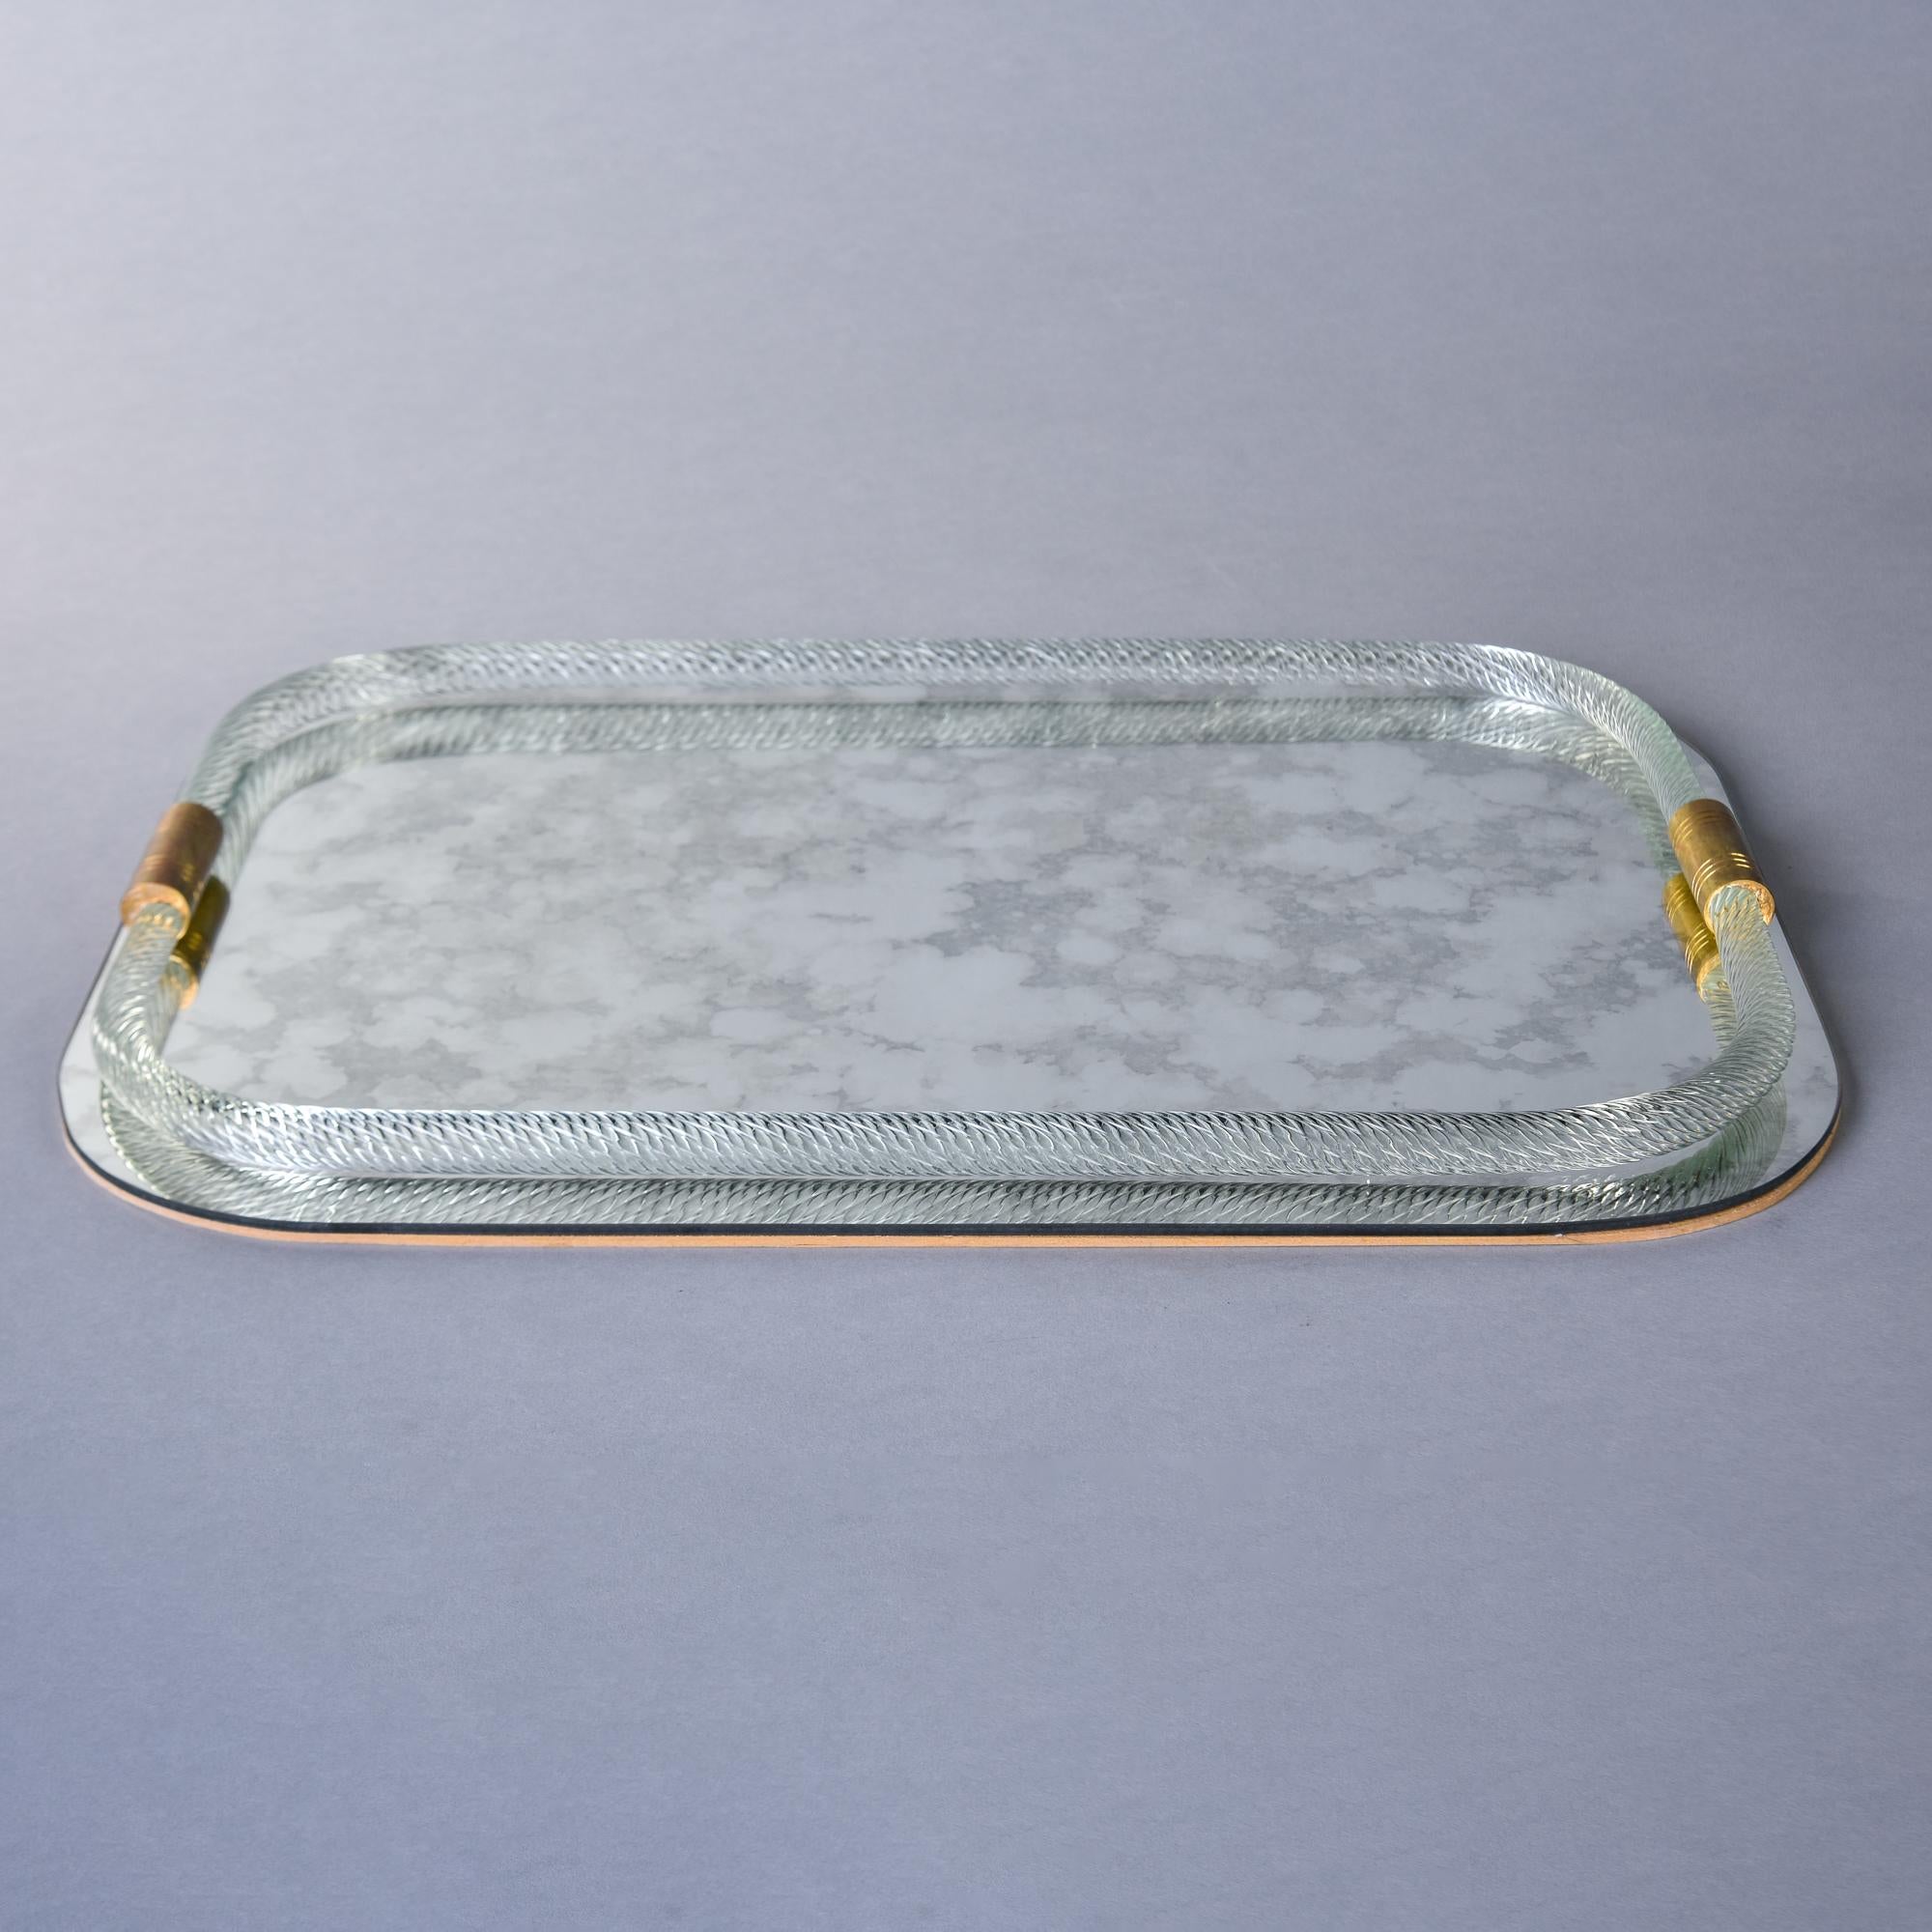 Found in Italy, this mirrored tray with Murano glass border and handles is attributed to Barovier. Rectangular tray has a wooden back with rounded corners, an antiqued mirrored base and a thick, clear twisted mouth blown Murano glass border with